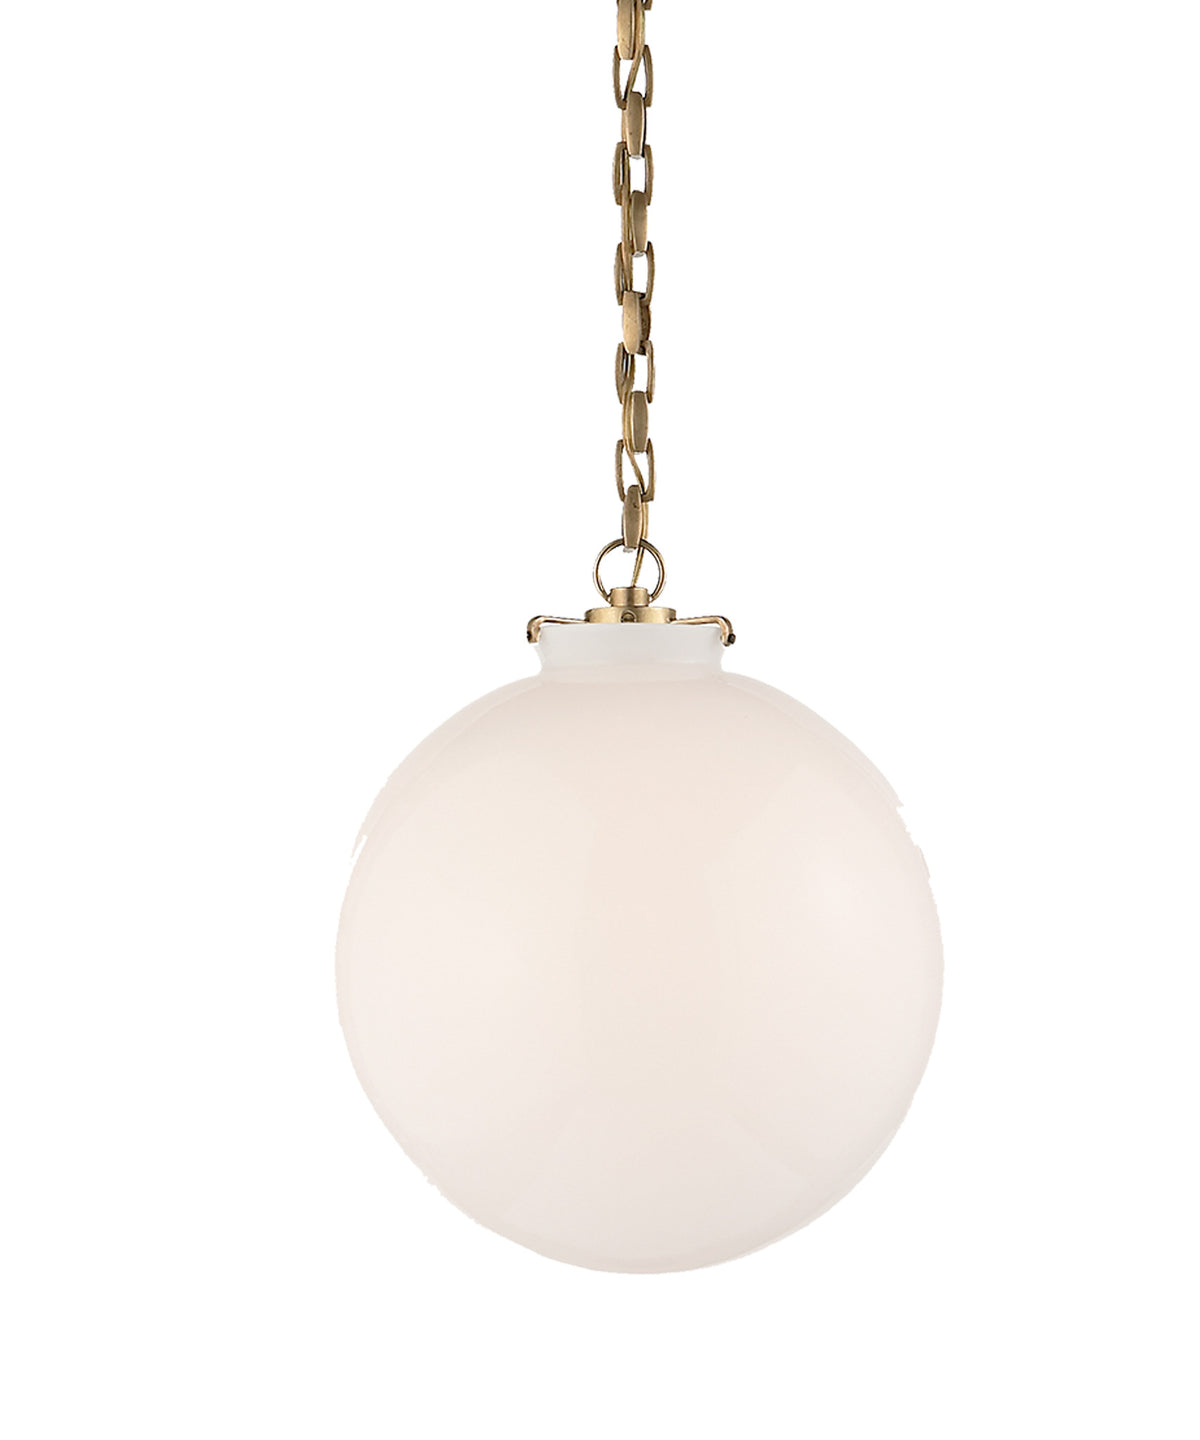 Bennett Pendant with Curved Milk Glass Shade, Hand-Rubbed Antique Brass